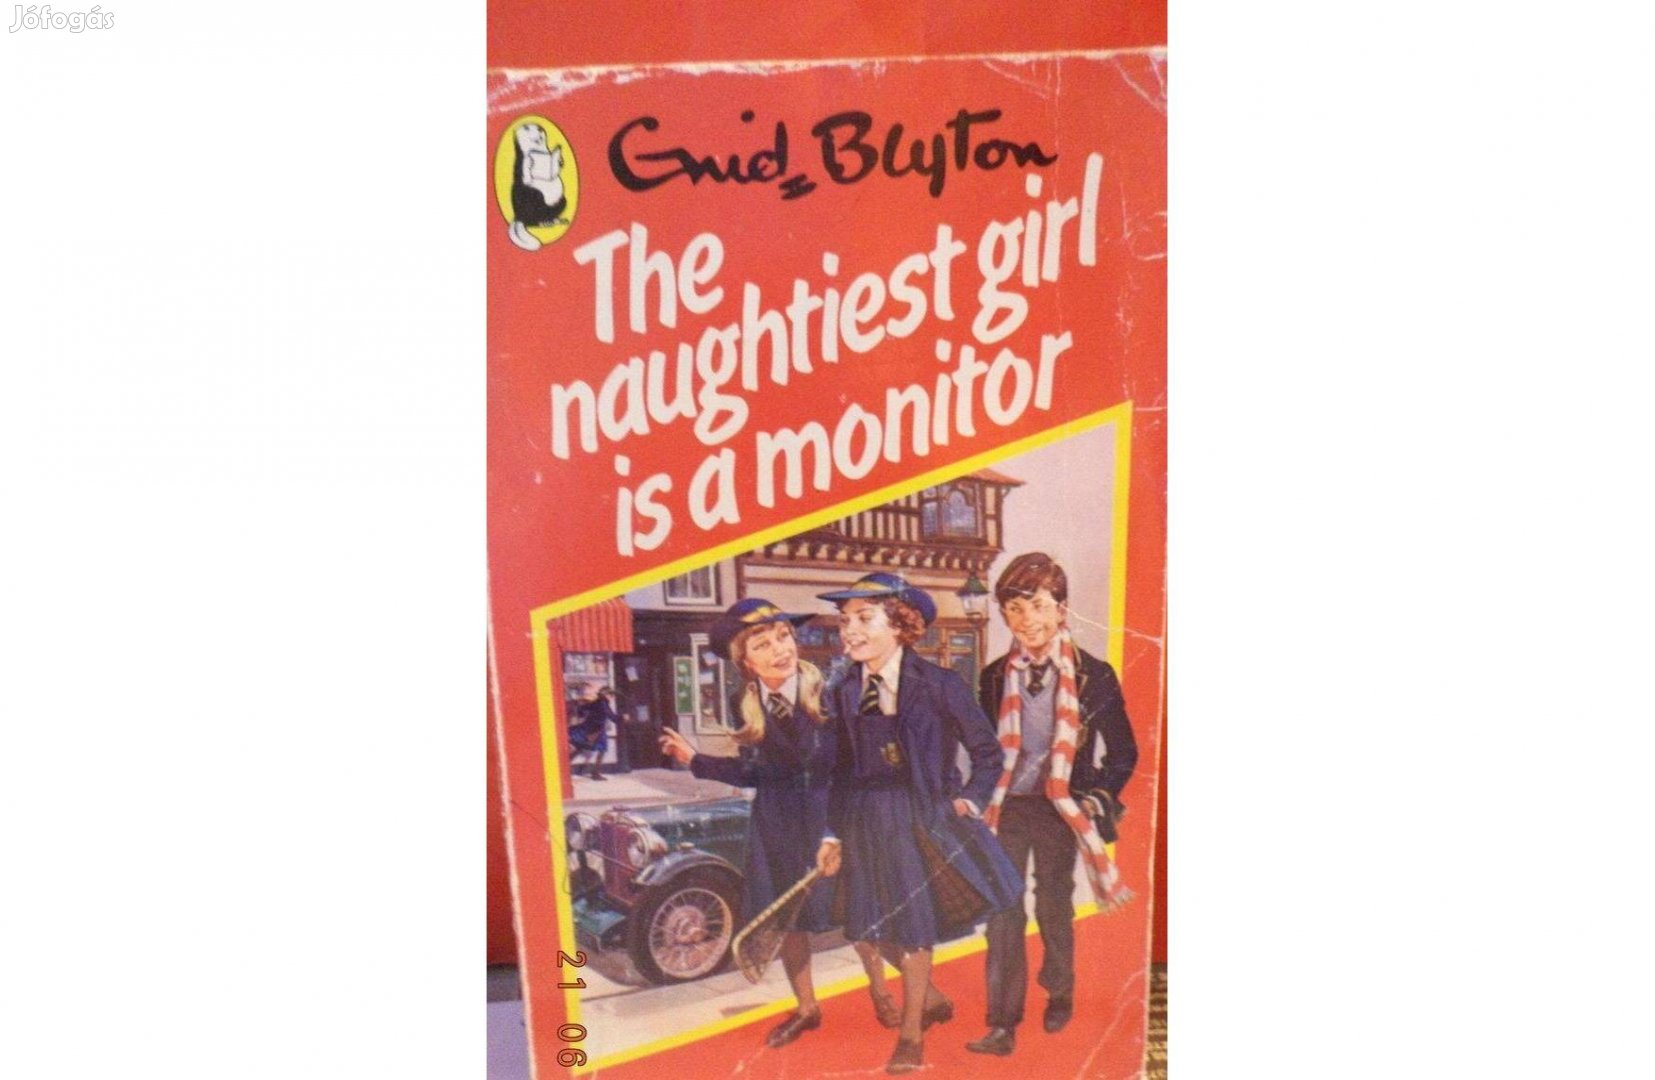 Enid Blyton: The naughtiest girl is a monitor